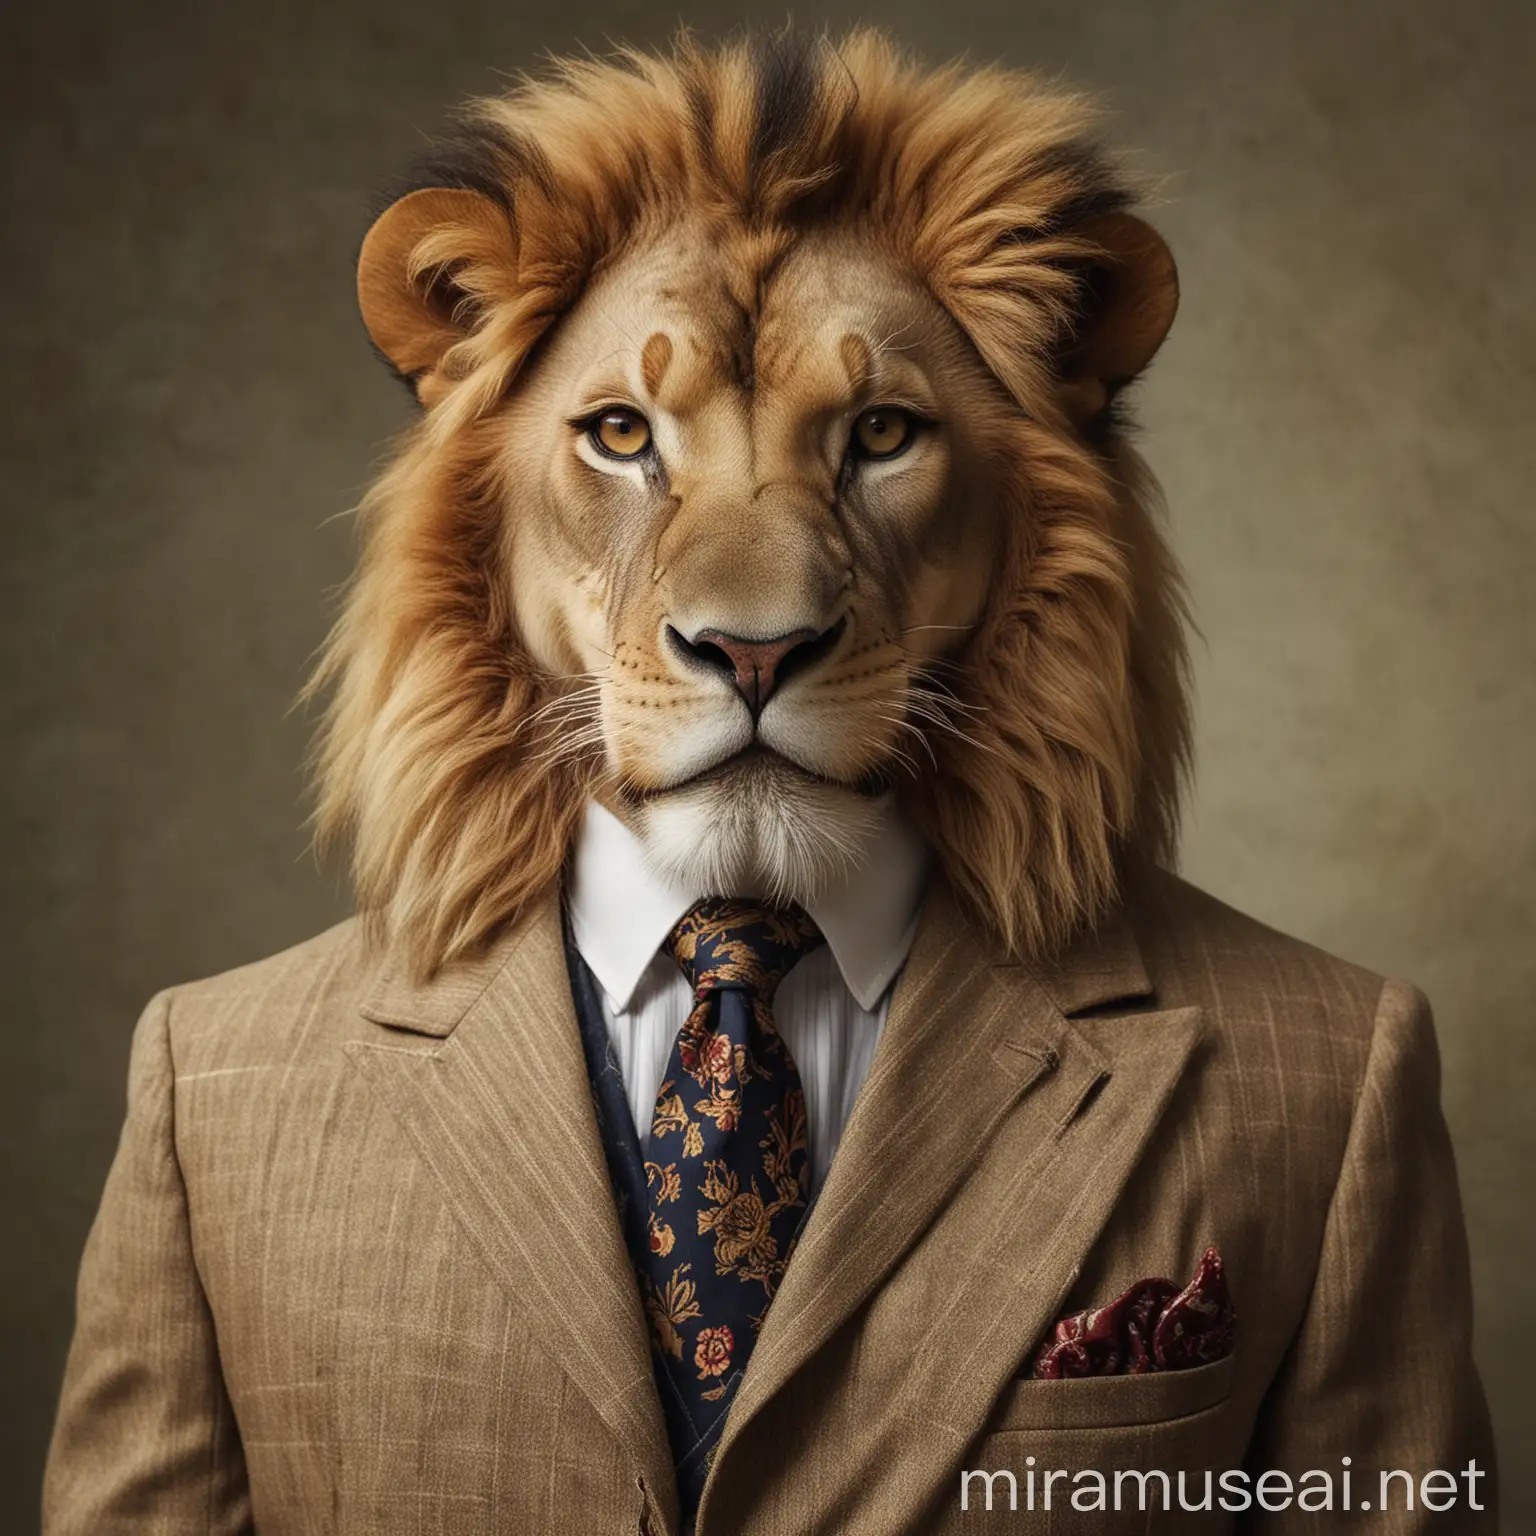 A lion in a classic old school suit